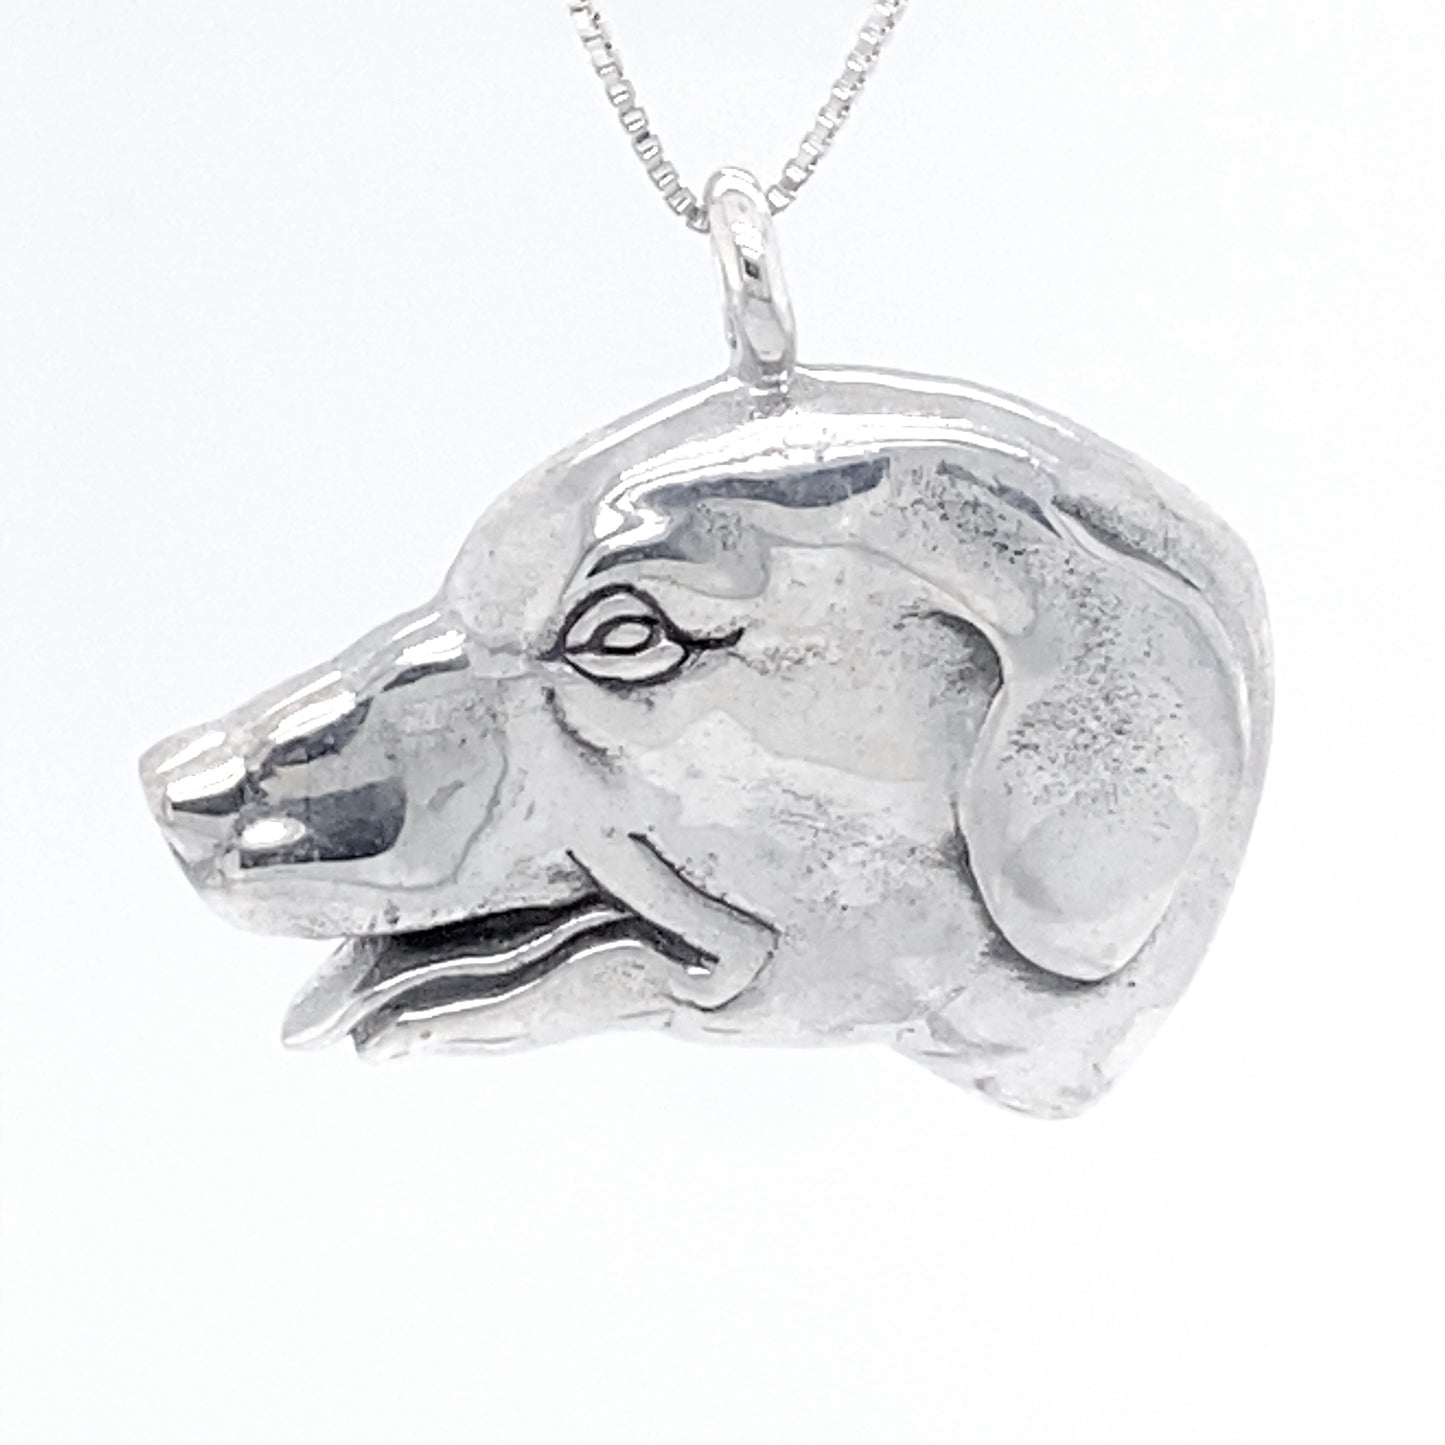 A Dog Head Pendant shaped like the head of a dog, showing detailed facial features and ears, is suspended from a thin chain—an ideal dog lover gift.